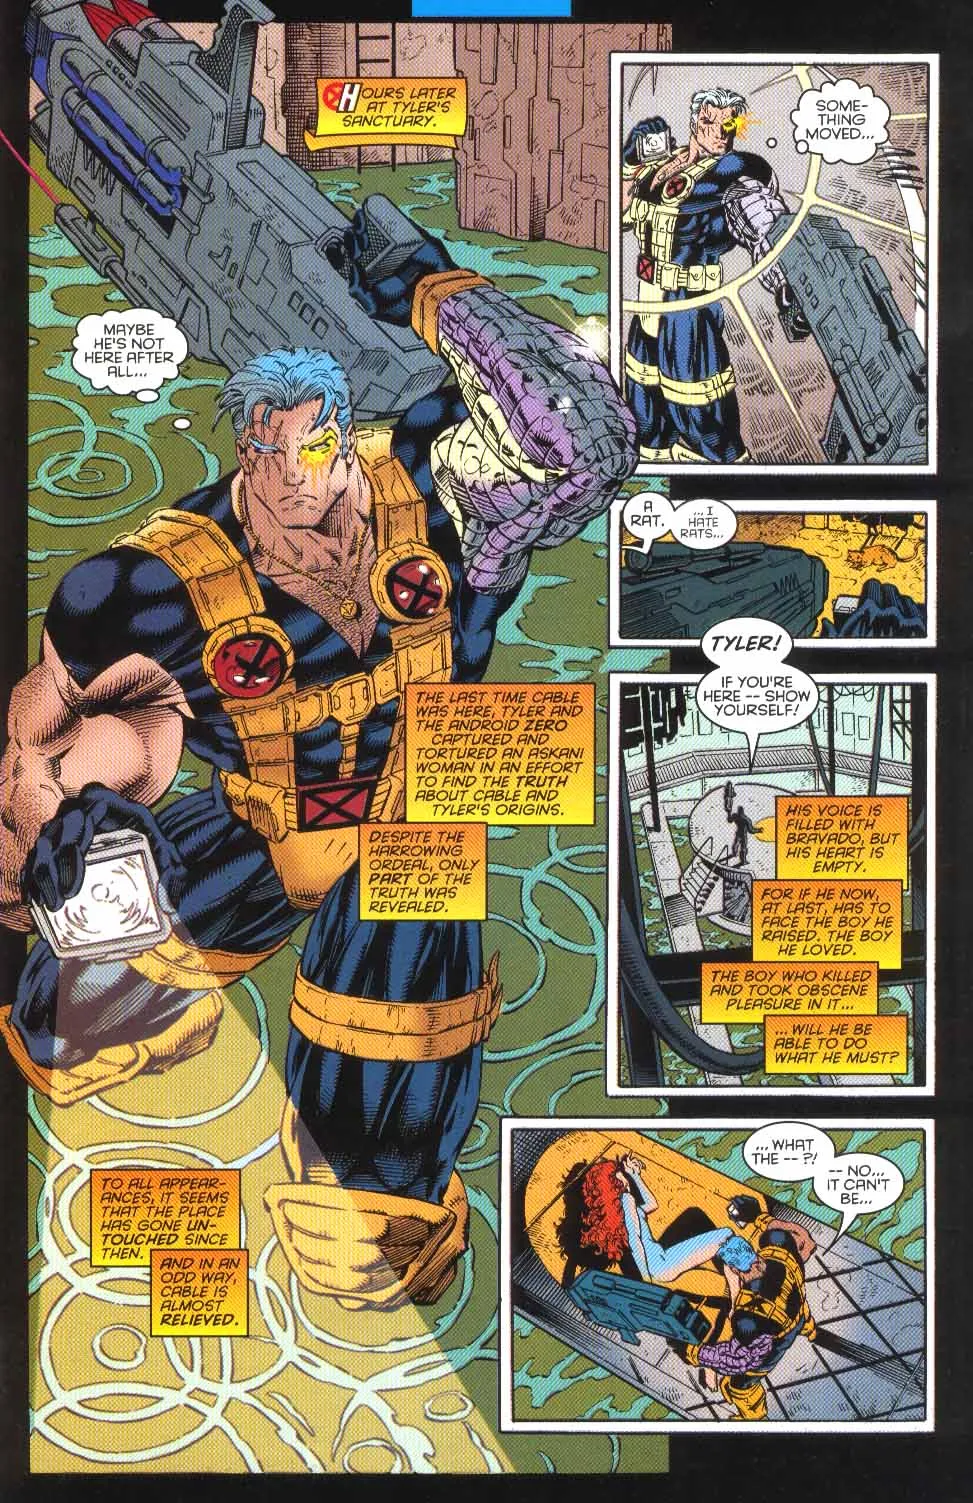 Cable holding a gun in Marvel Comics .  This image is part of an article about 7 obscure moments in Marvel history that were immortalized in video games.